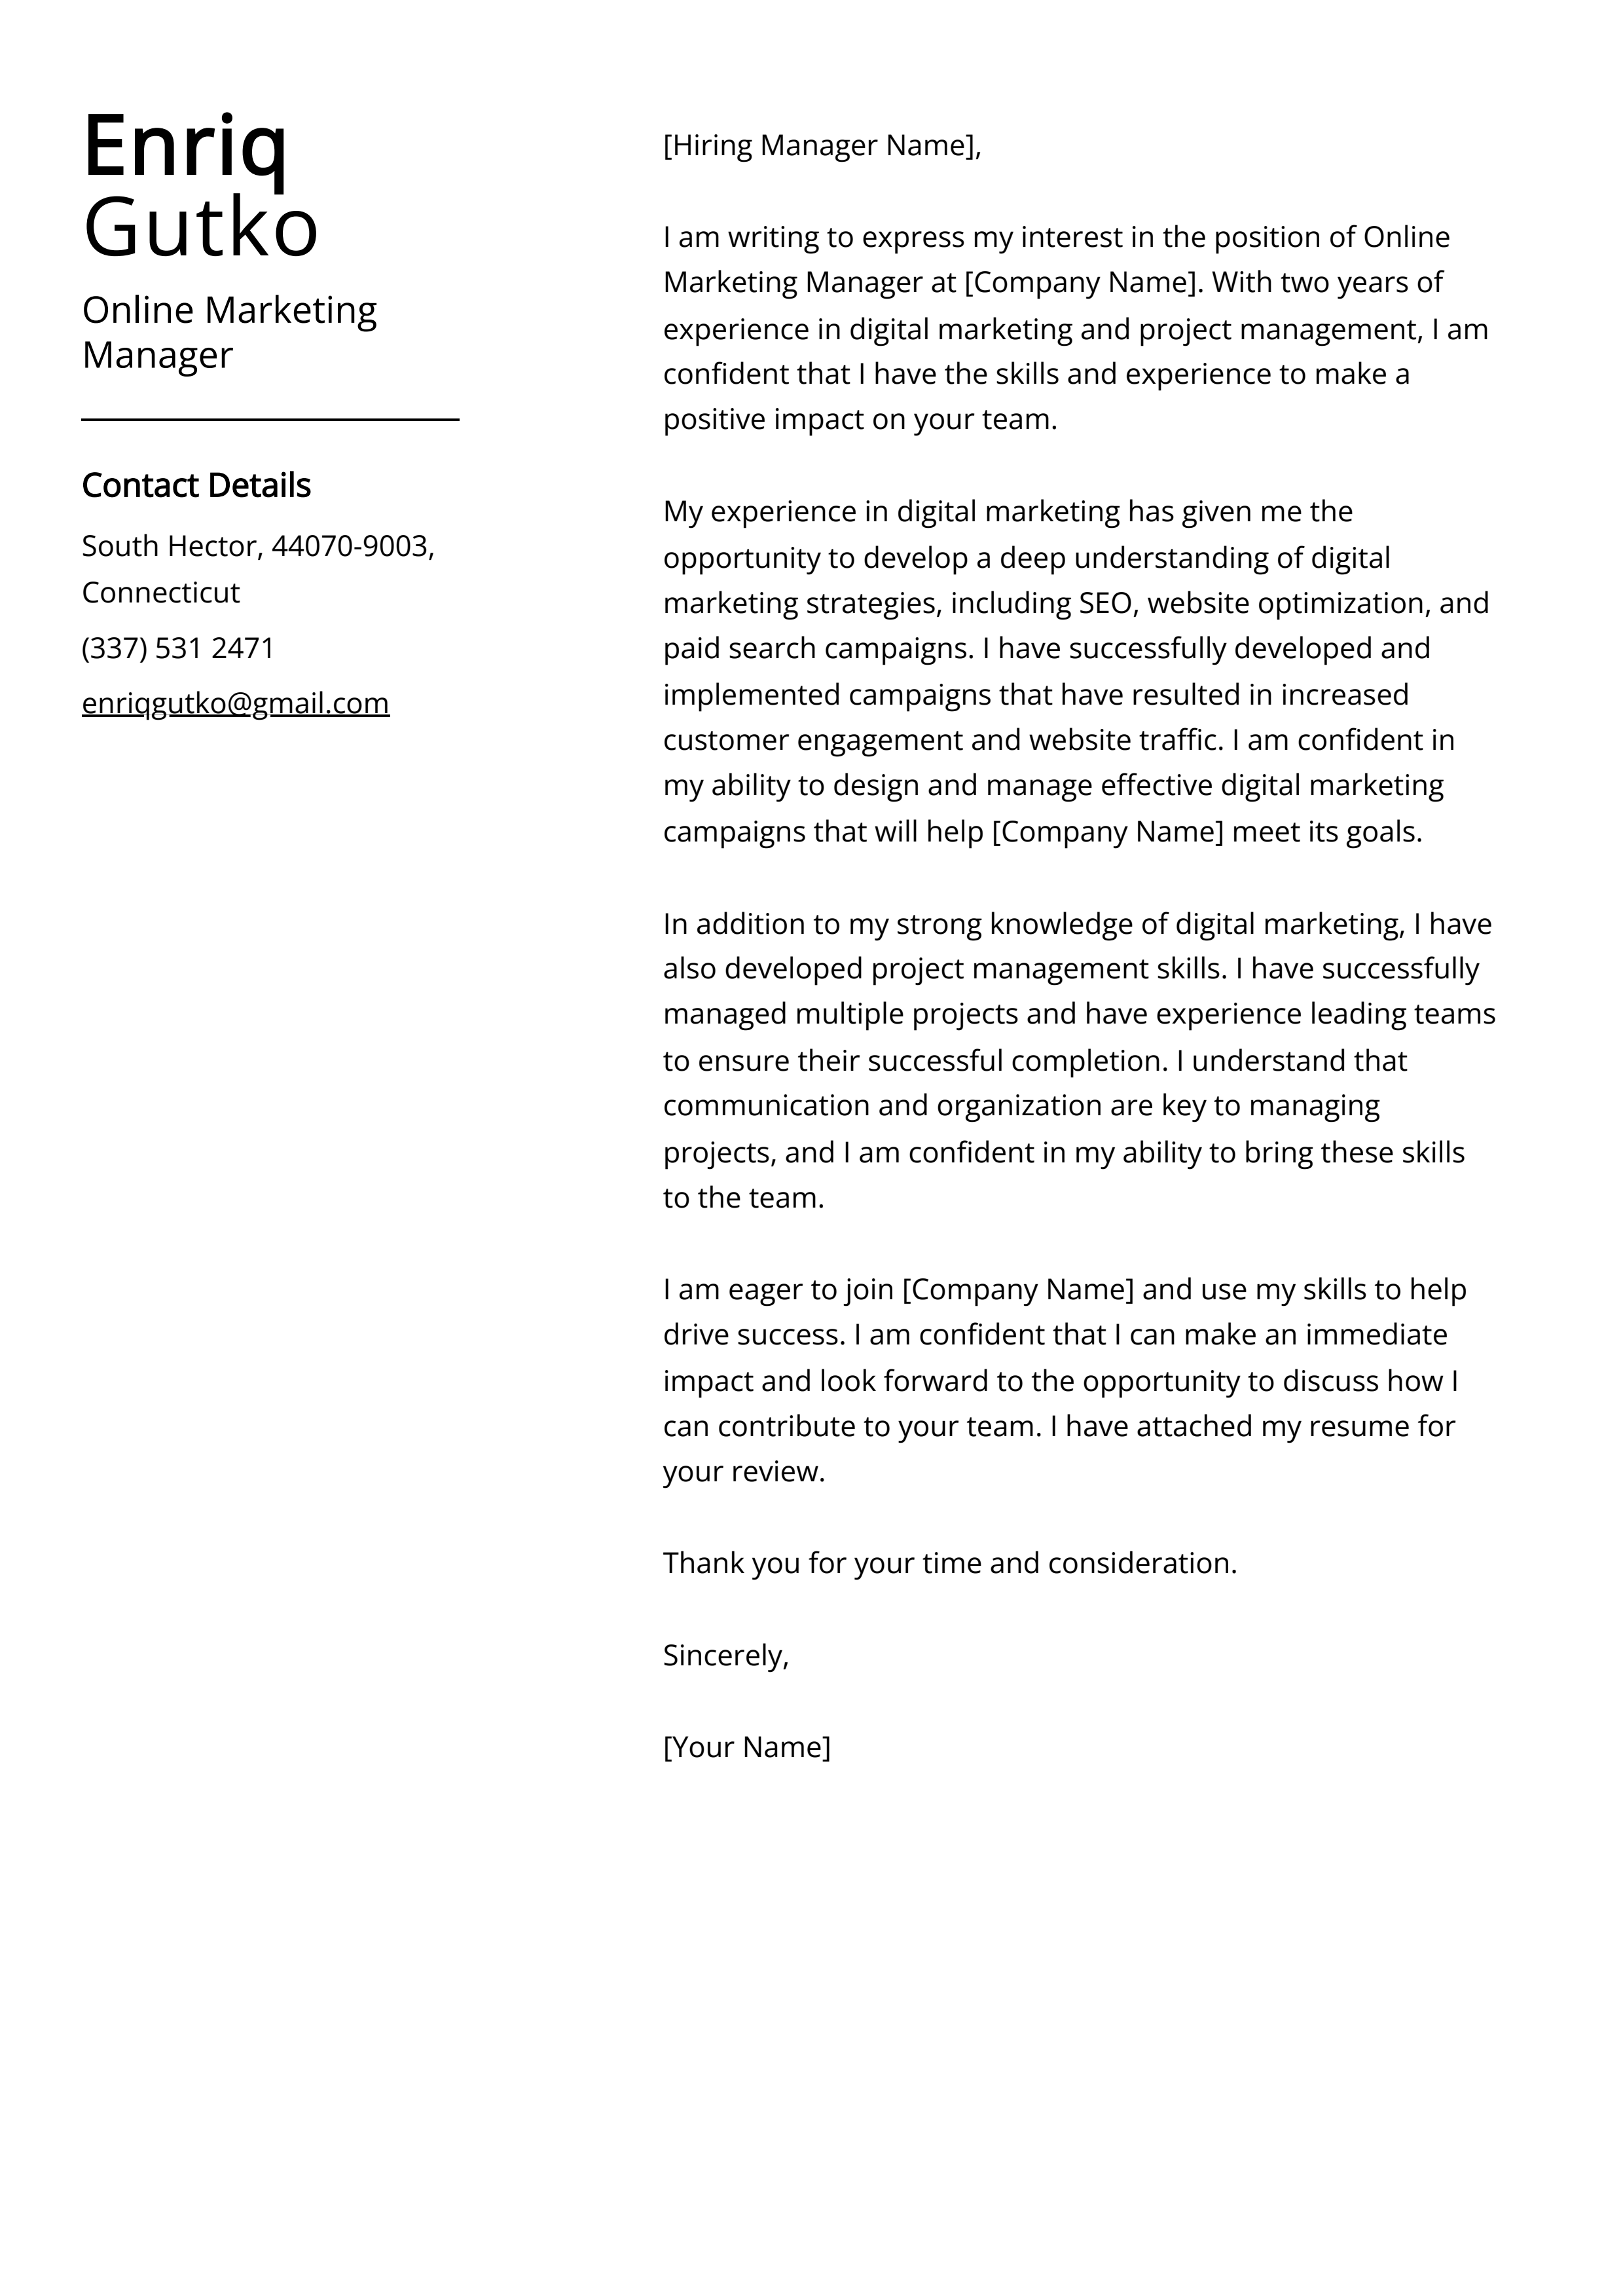 Online Marketing Manager Cover Letter Example